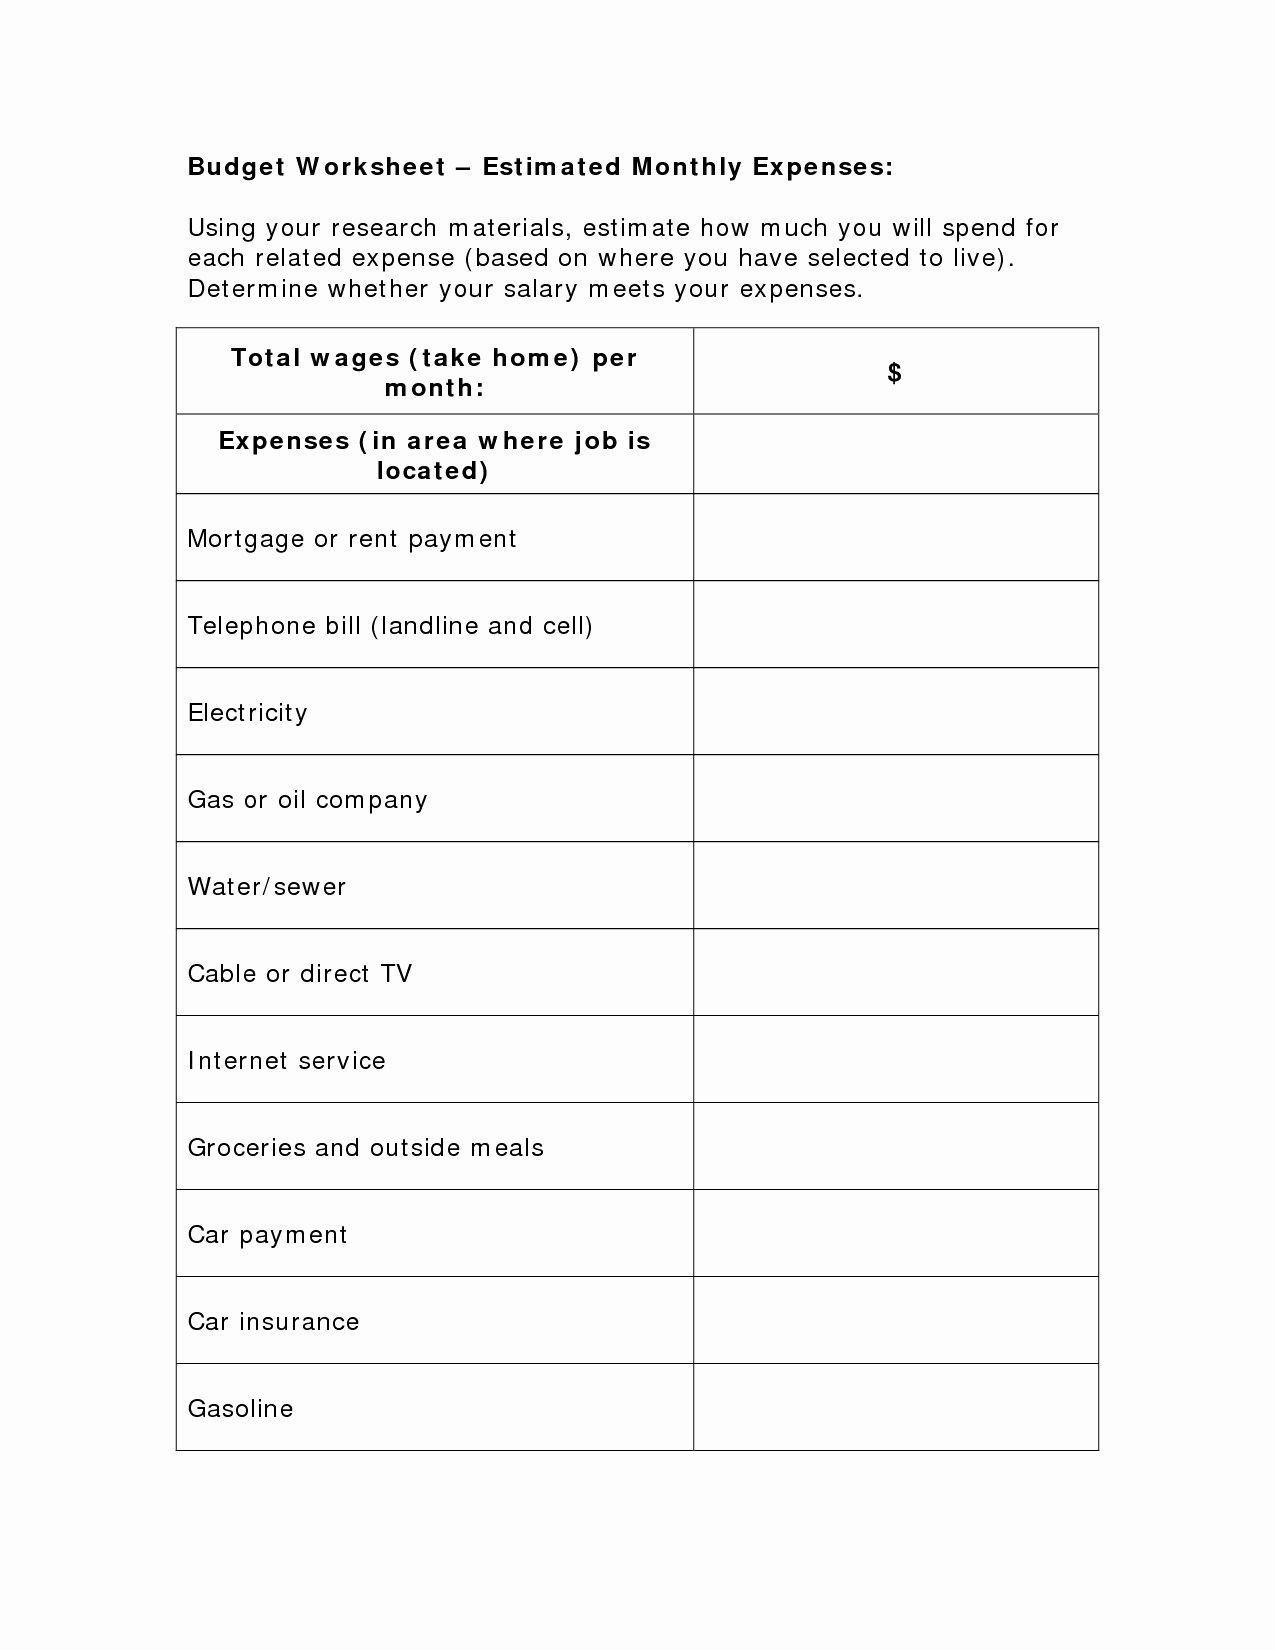 Icivics The Constitution Worksheet Answers